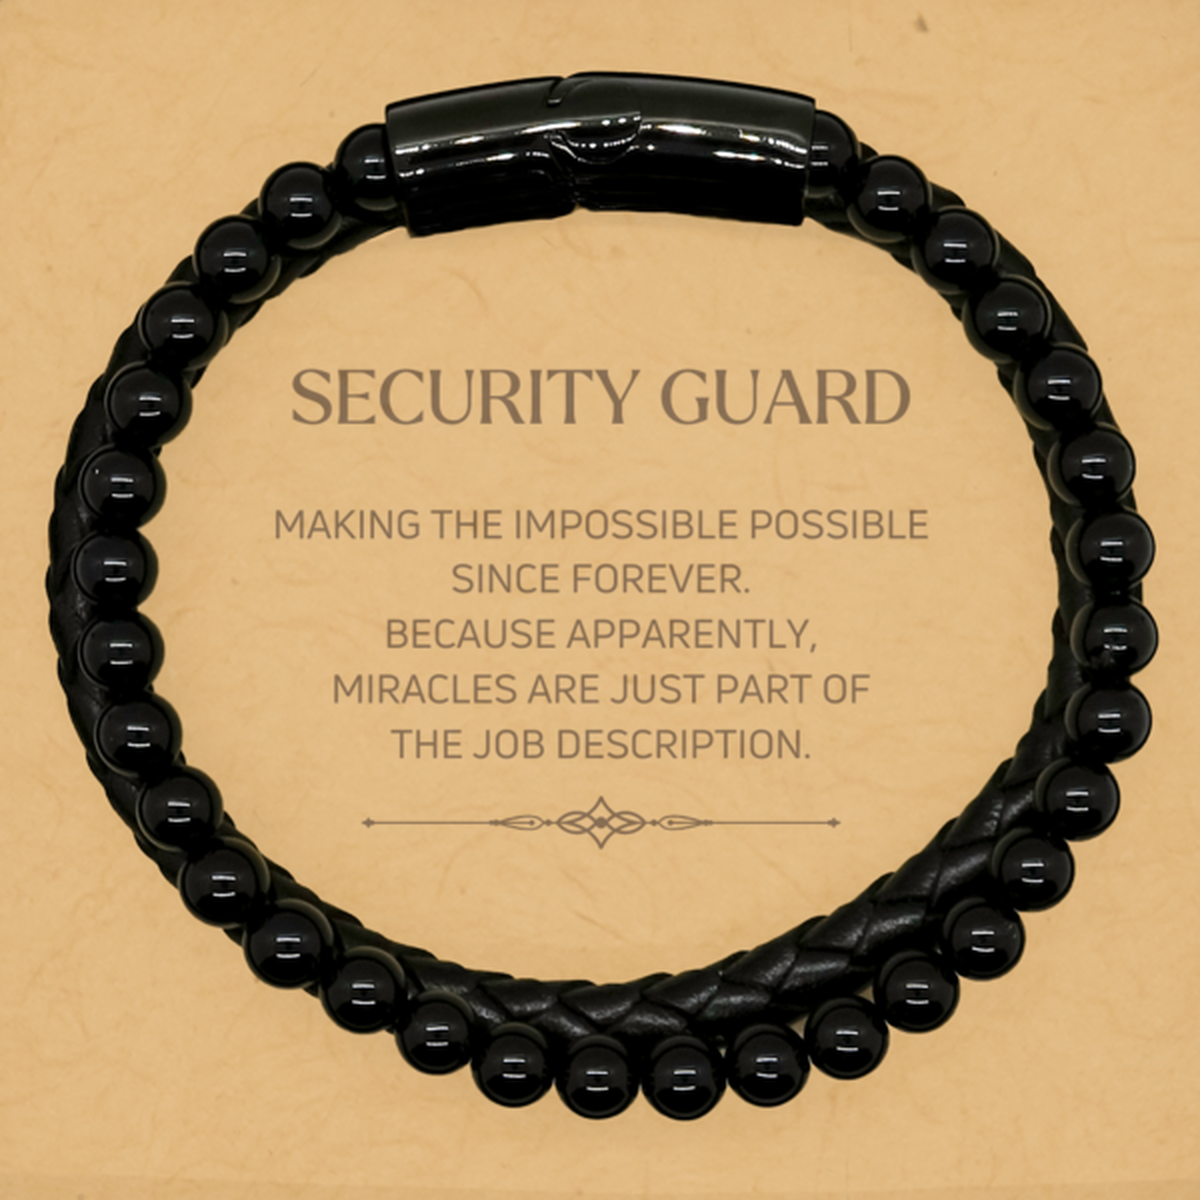 Funny Security Guard Gifts, Miracles are just part of the job description, Inspirational Birthday Stone Leather Bracelets For Security Guard, Men, Women, Coworkers, Friends, Boss